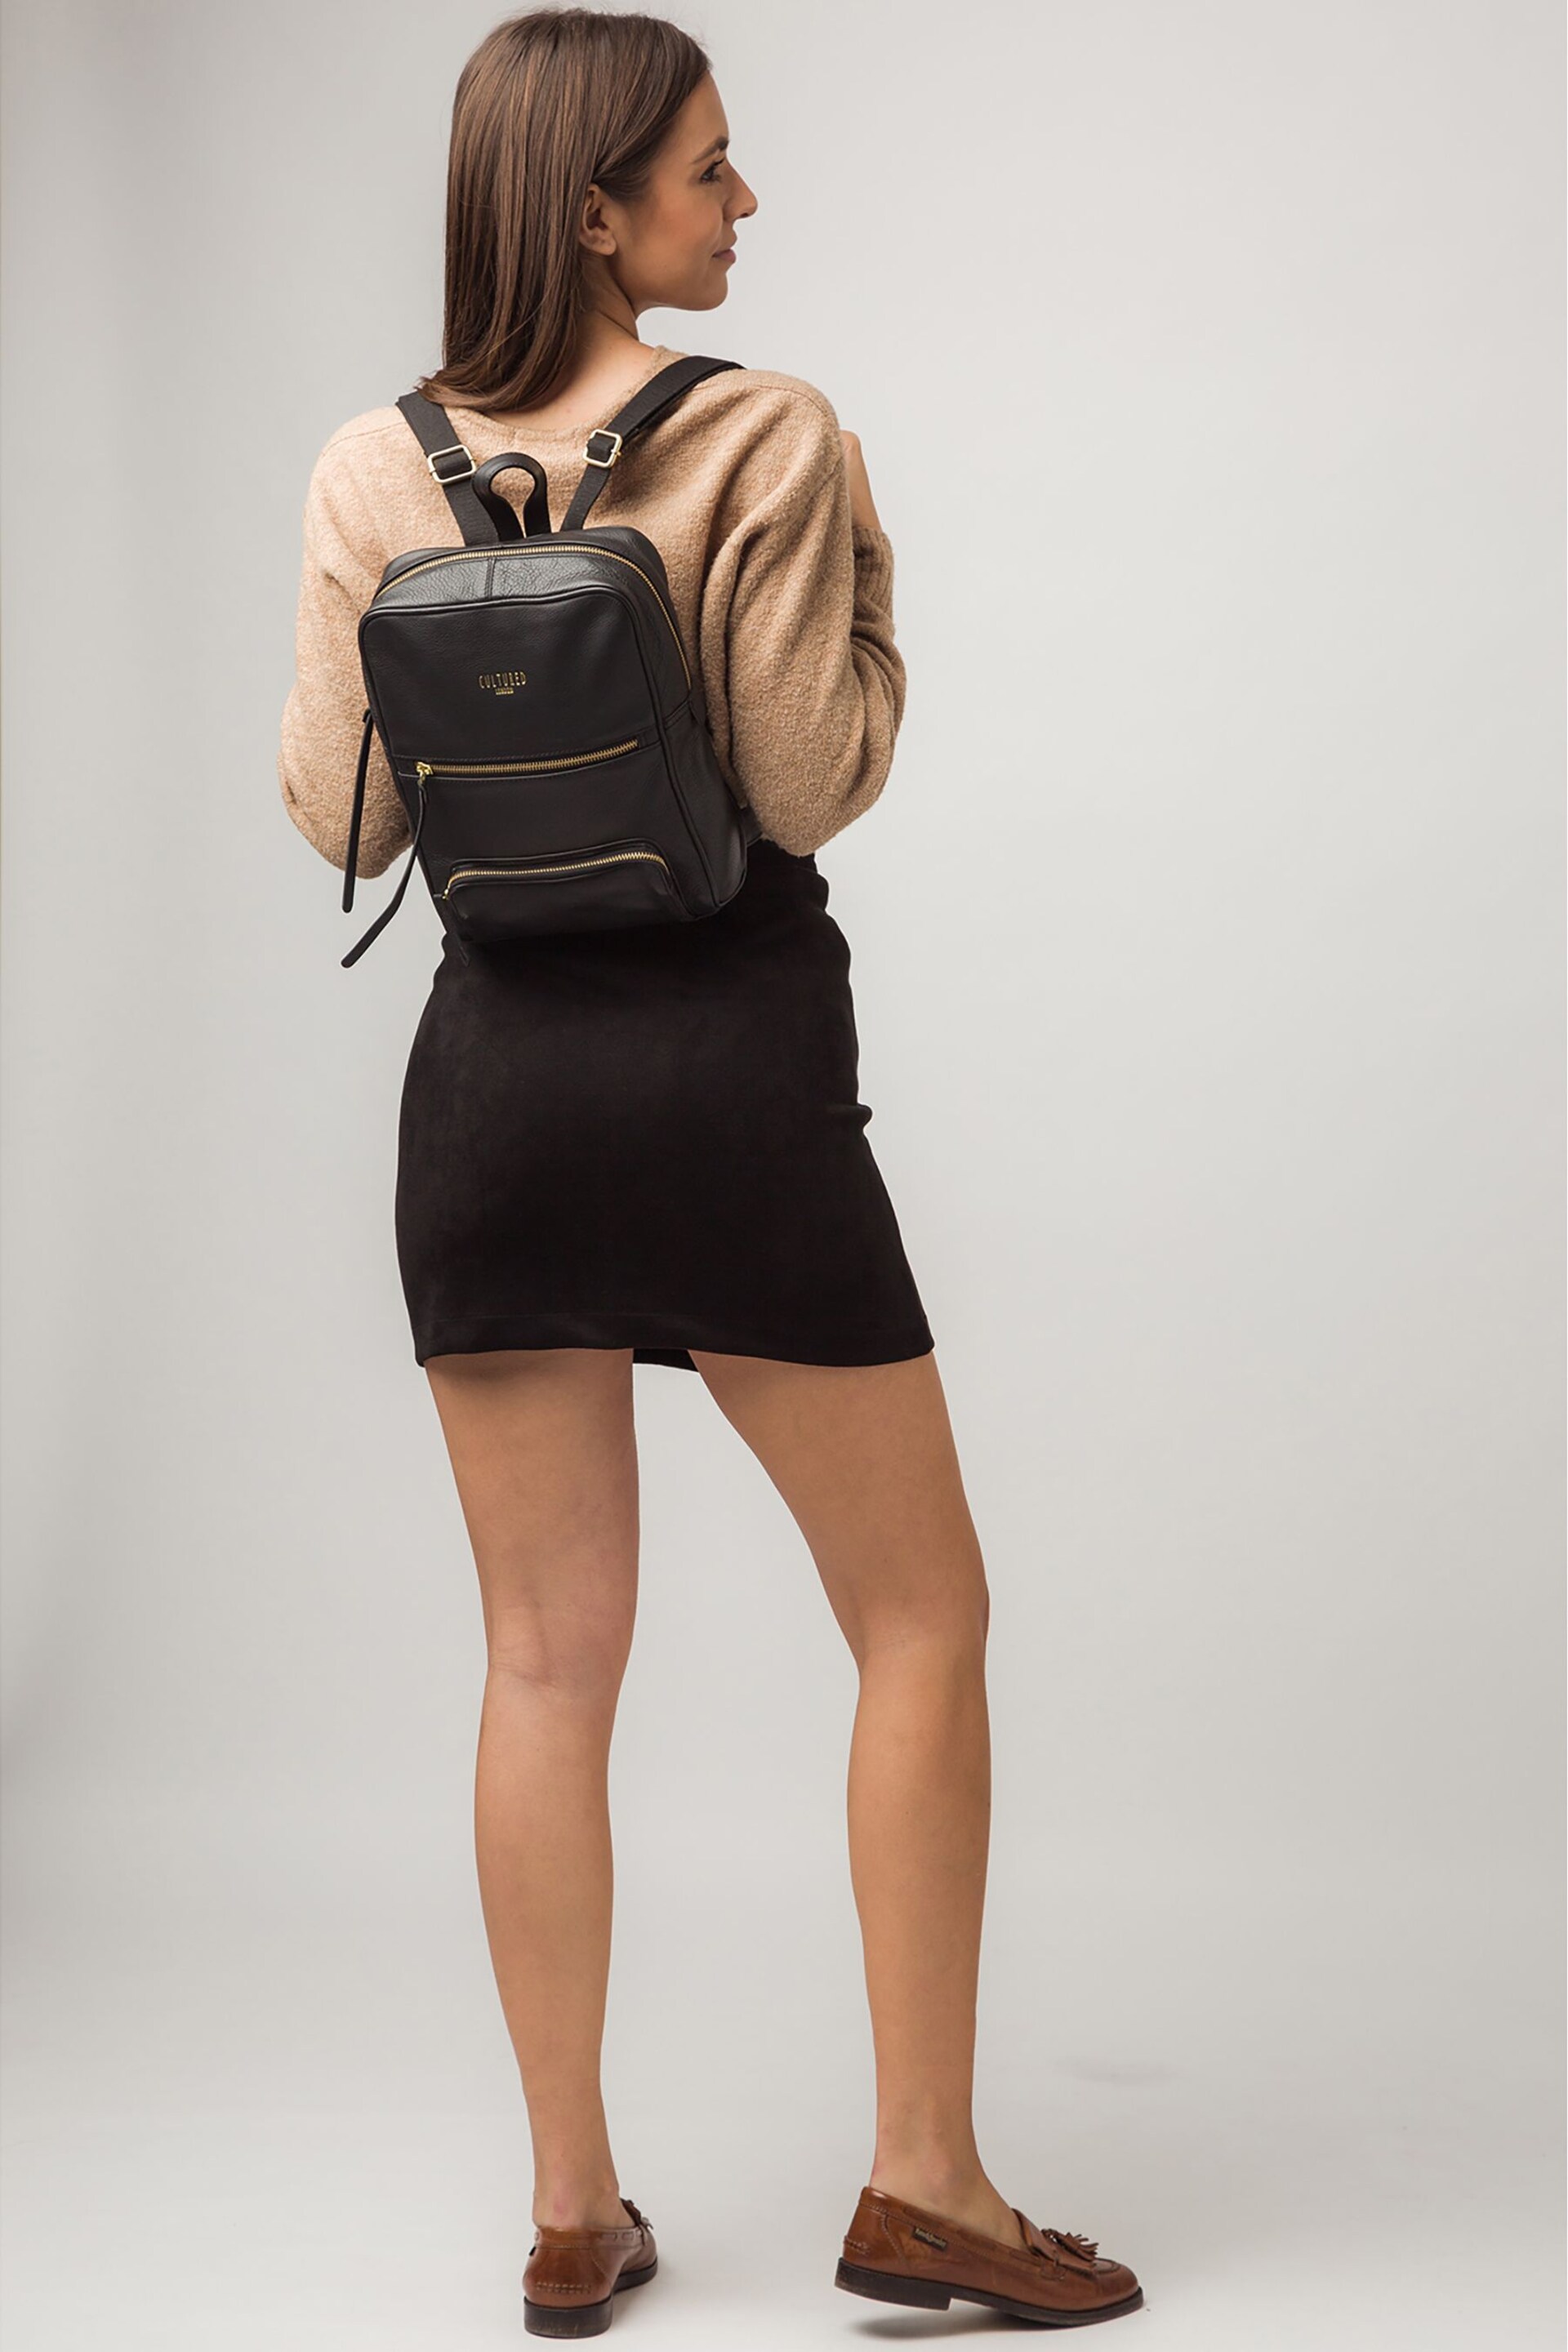 Cultured London Abbey Leather Backpack - Image 1 of 5